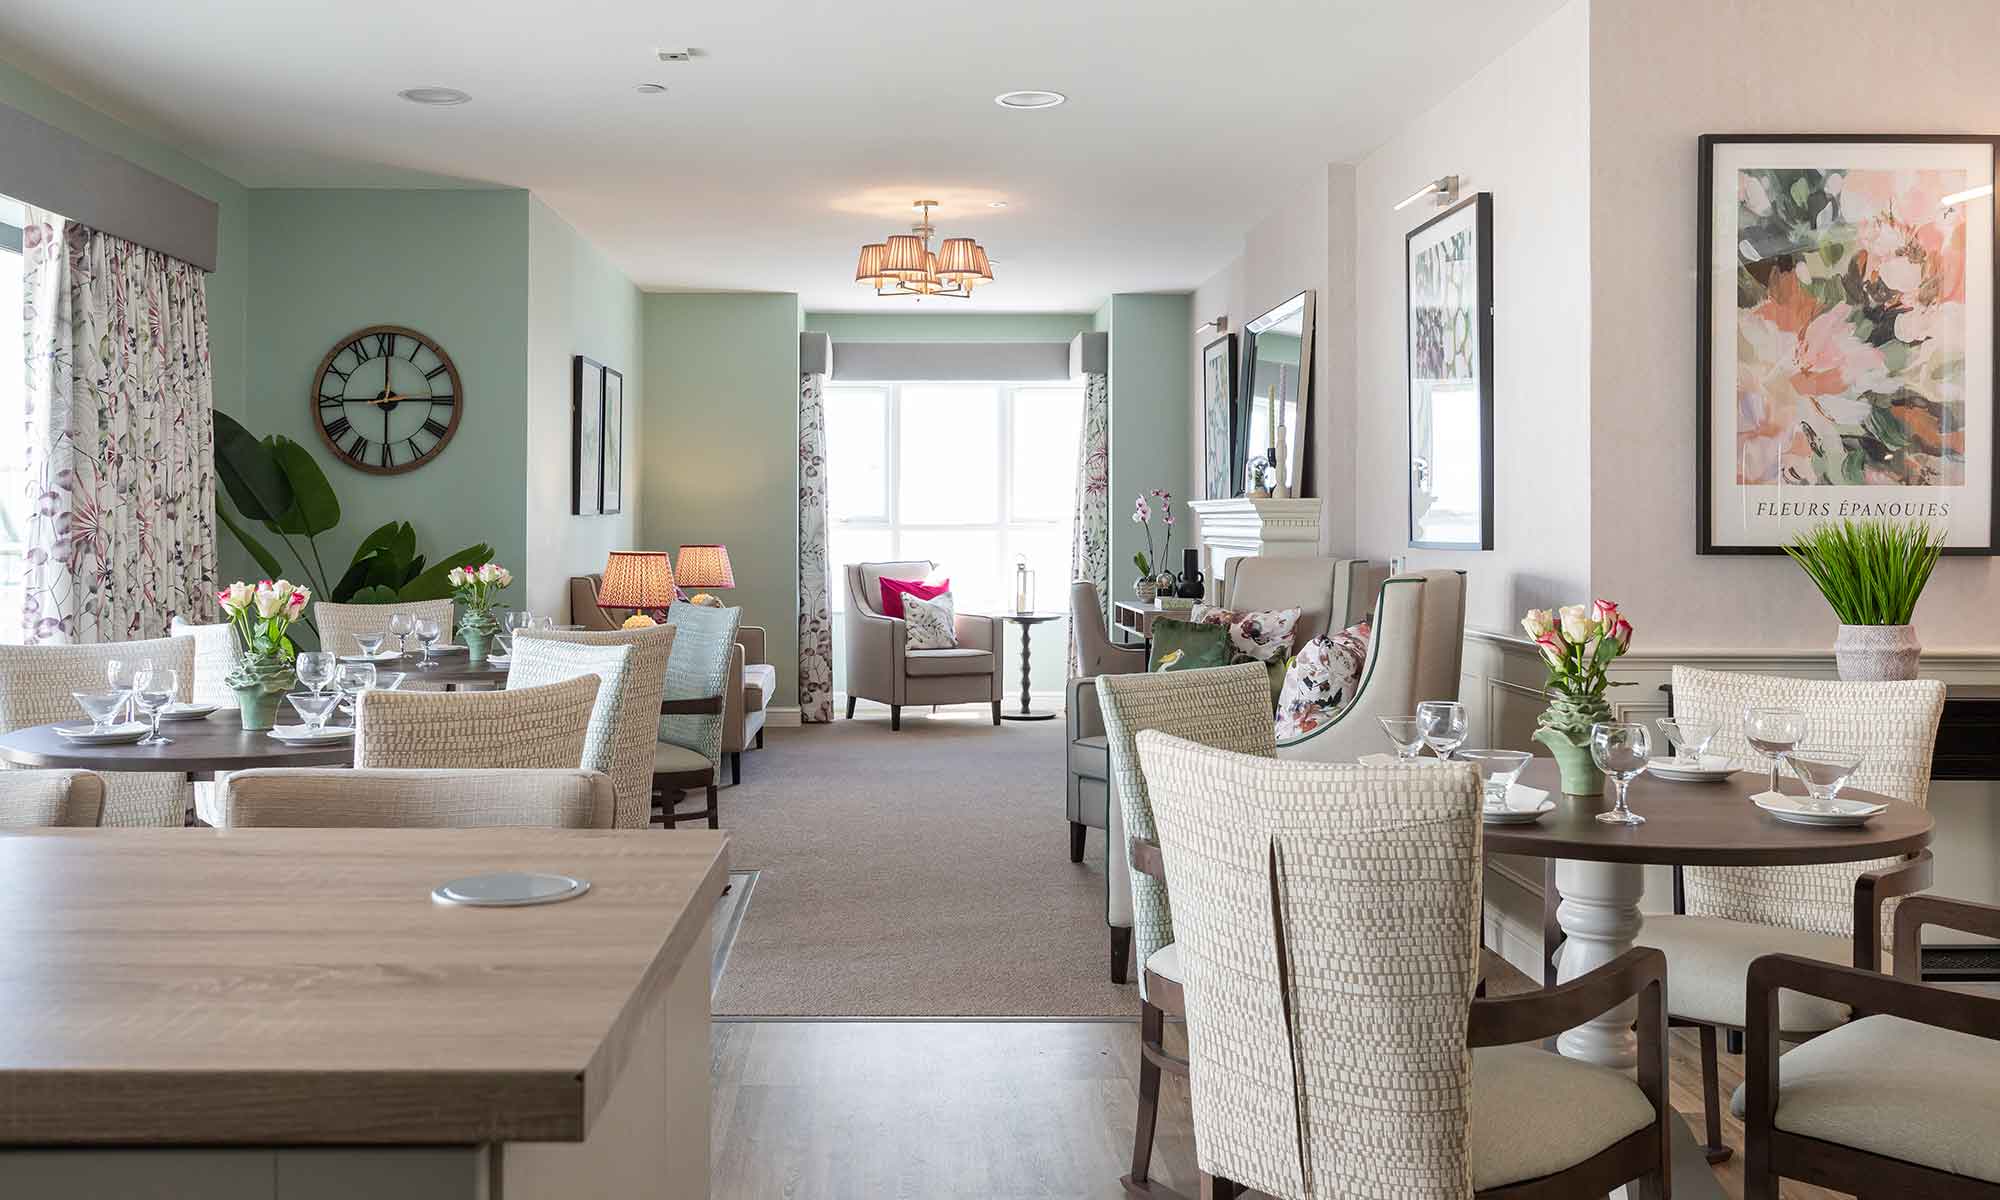 Lounge and dining area at a care home. Orto high back chair with Aberford pedestal table in distance, Assisi dining chairs with Woodbury dining table